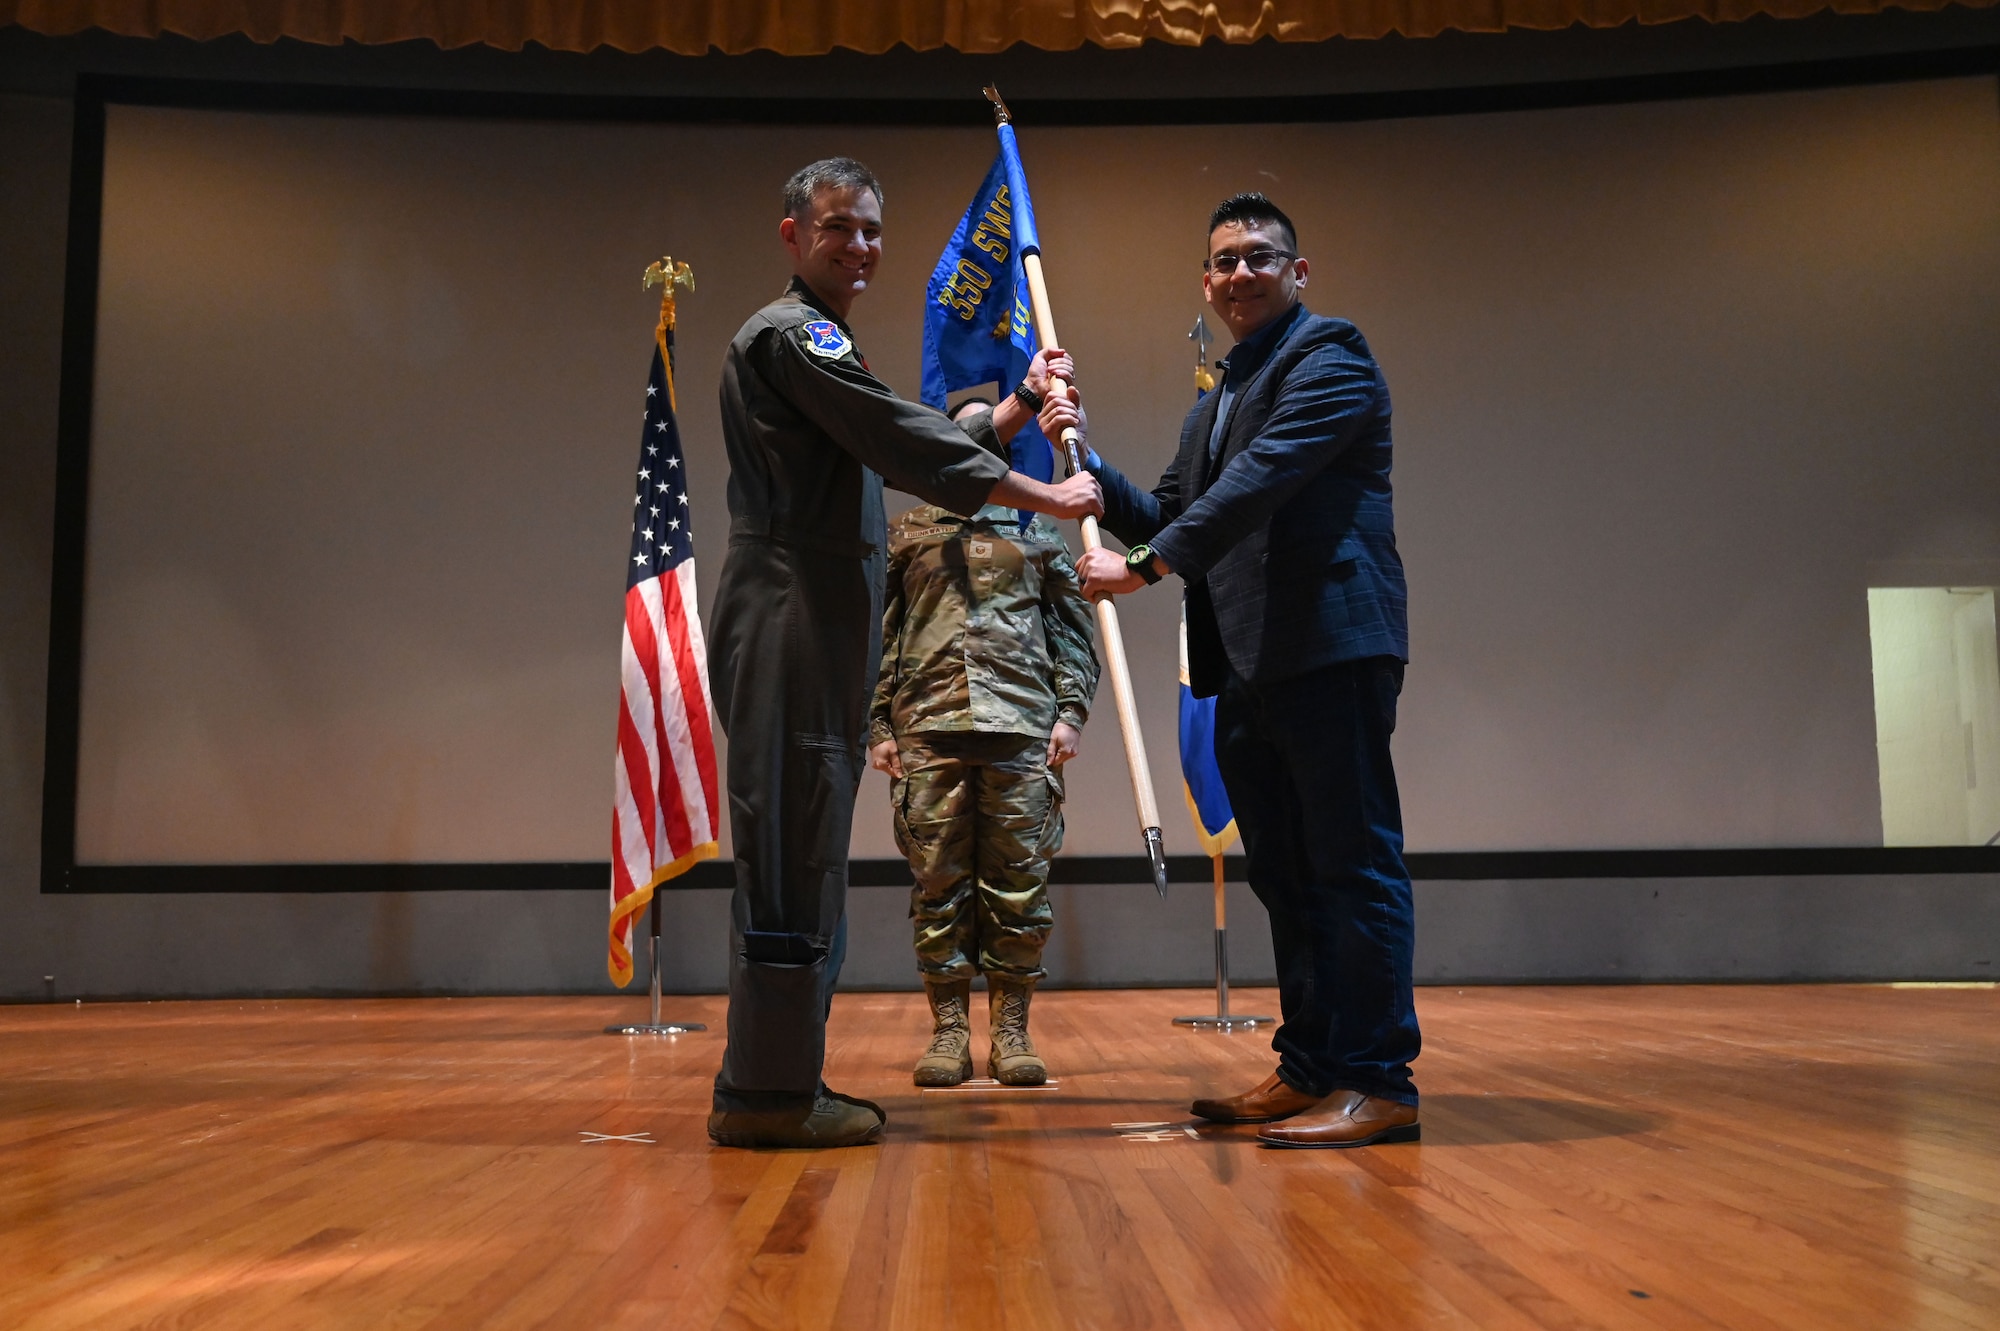 U.S. Air Force Lt. Col. Luke Marron, 350th Spectrum Warfare Group, Detachment 1, commander, inducts Brian Squire, the Executive Vice President at Hays Companies and Brown and Brown Insurance and serves on the Destin Chamber of Commerce, during the wing’s first Honorary Commander Induction ceremony, at Eglin Air Force Base, Fla., Dec. 1, 2023. Honorary Commanders serve as the liaison between the 350th Spectrum Warfare Wing and the surrounding community by maintaining strong relations through mutually beneficial professional partnership. (U.S. Air Force photo by Staff Sgt. Ericka A. Woolever)